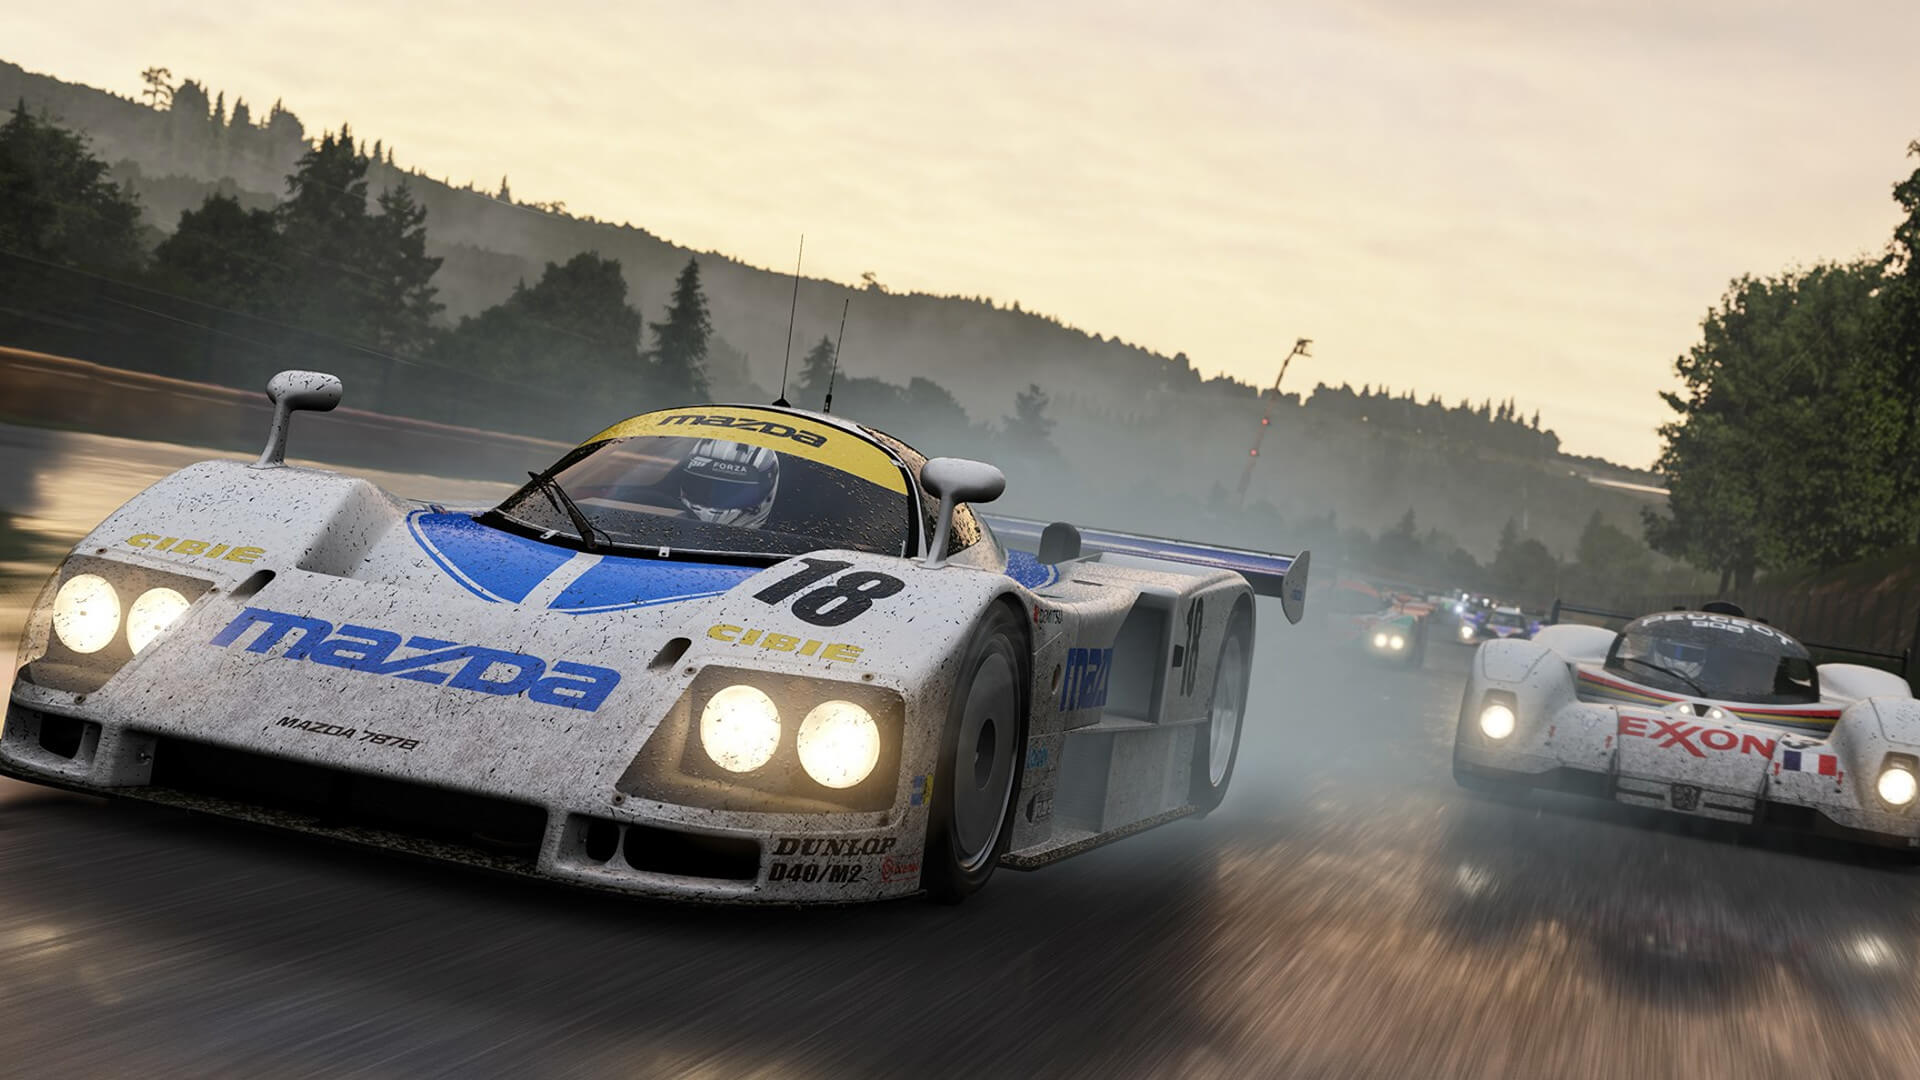 Two high-spec cars racing in Forza Motorsport 6